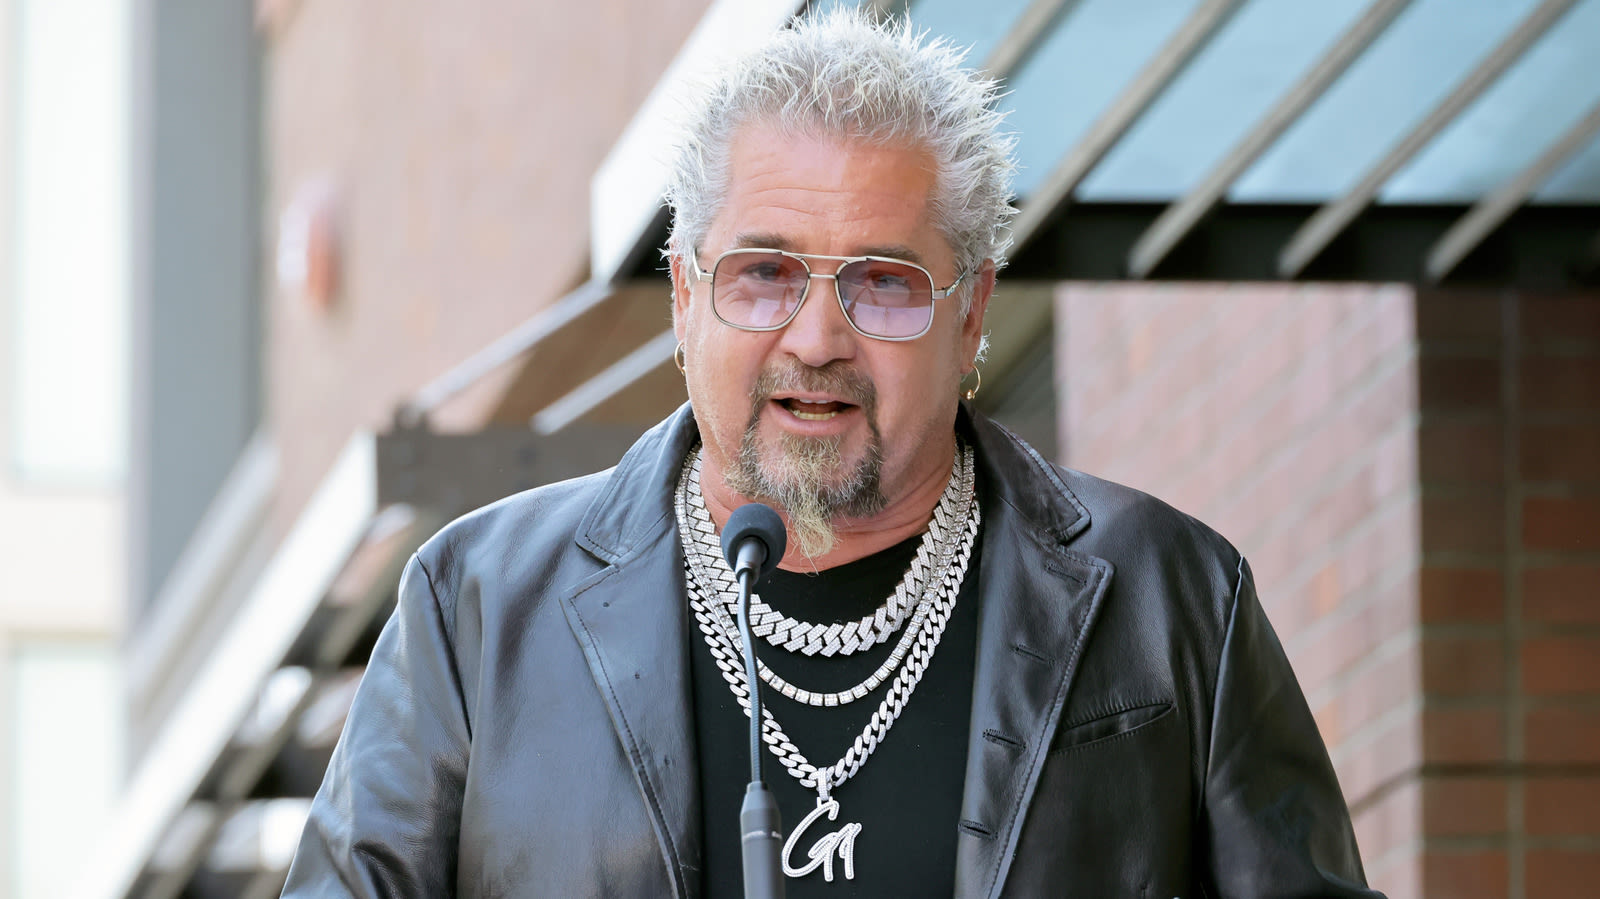 The Wholesome Fact About Guy Fieri We're So Happy We Learned